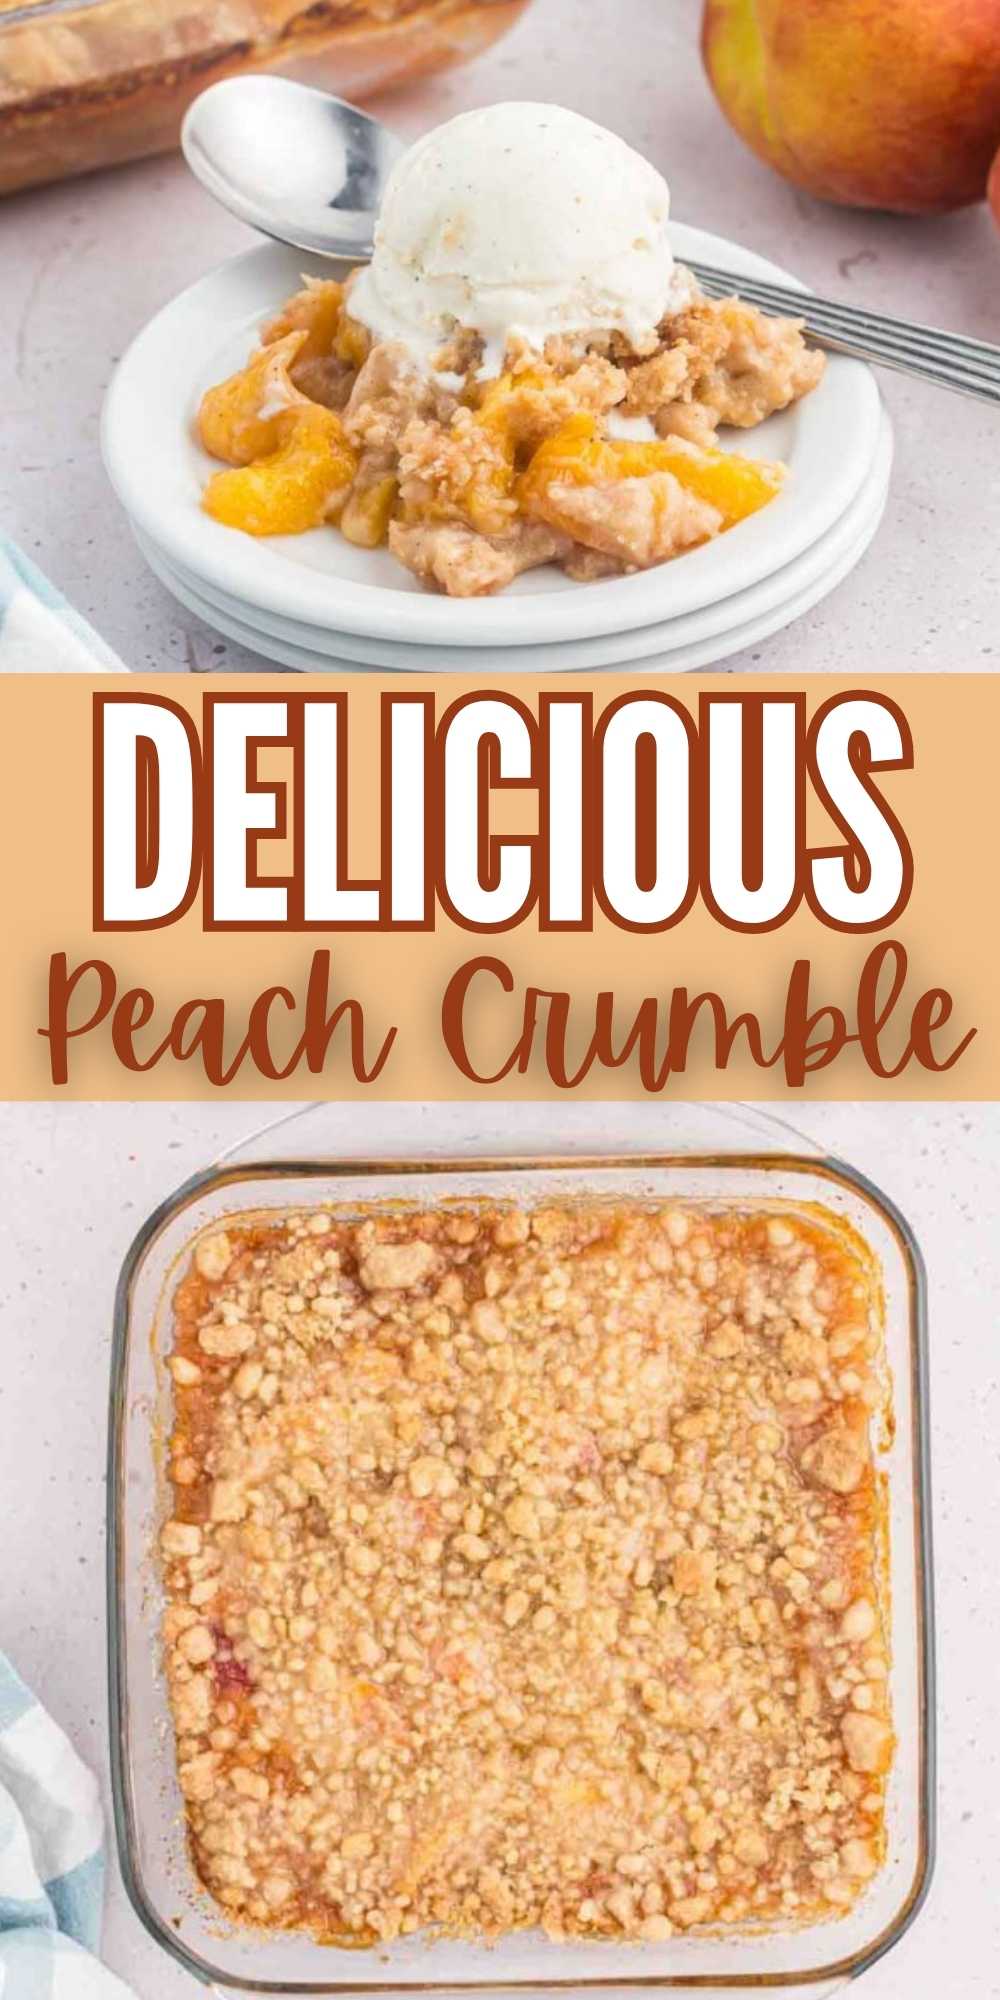 This made from scratch Peach Crumble is the perfect dessert to enjoy all year long. The crumble topping over peaches makes it so delicious. You will love the rich peach flavor and crumb topping. Feel free to substitute with canned peaches or frozen peaches. This peach crisp dessert is always a family favorite. #eatingonadime #peachcrumble #peachdessert